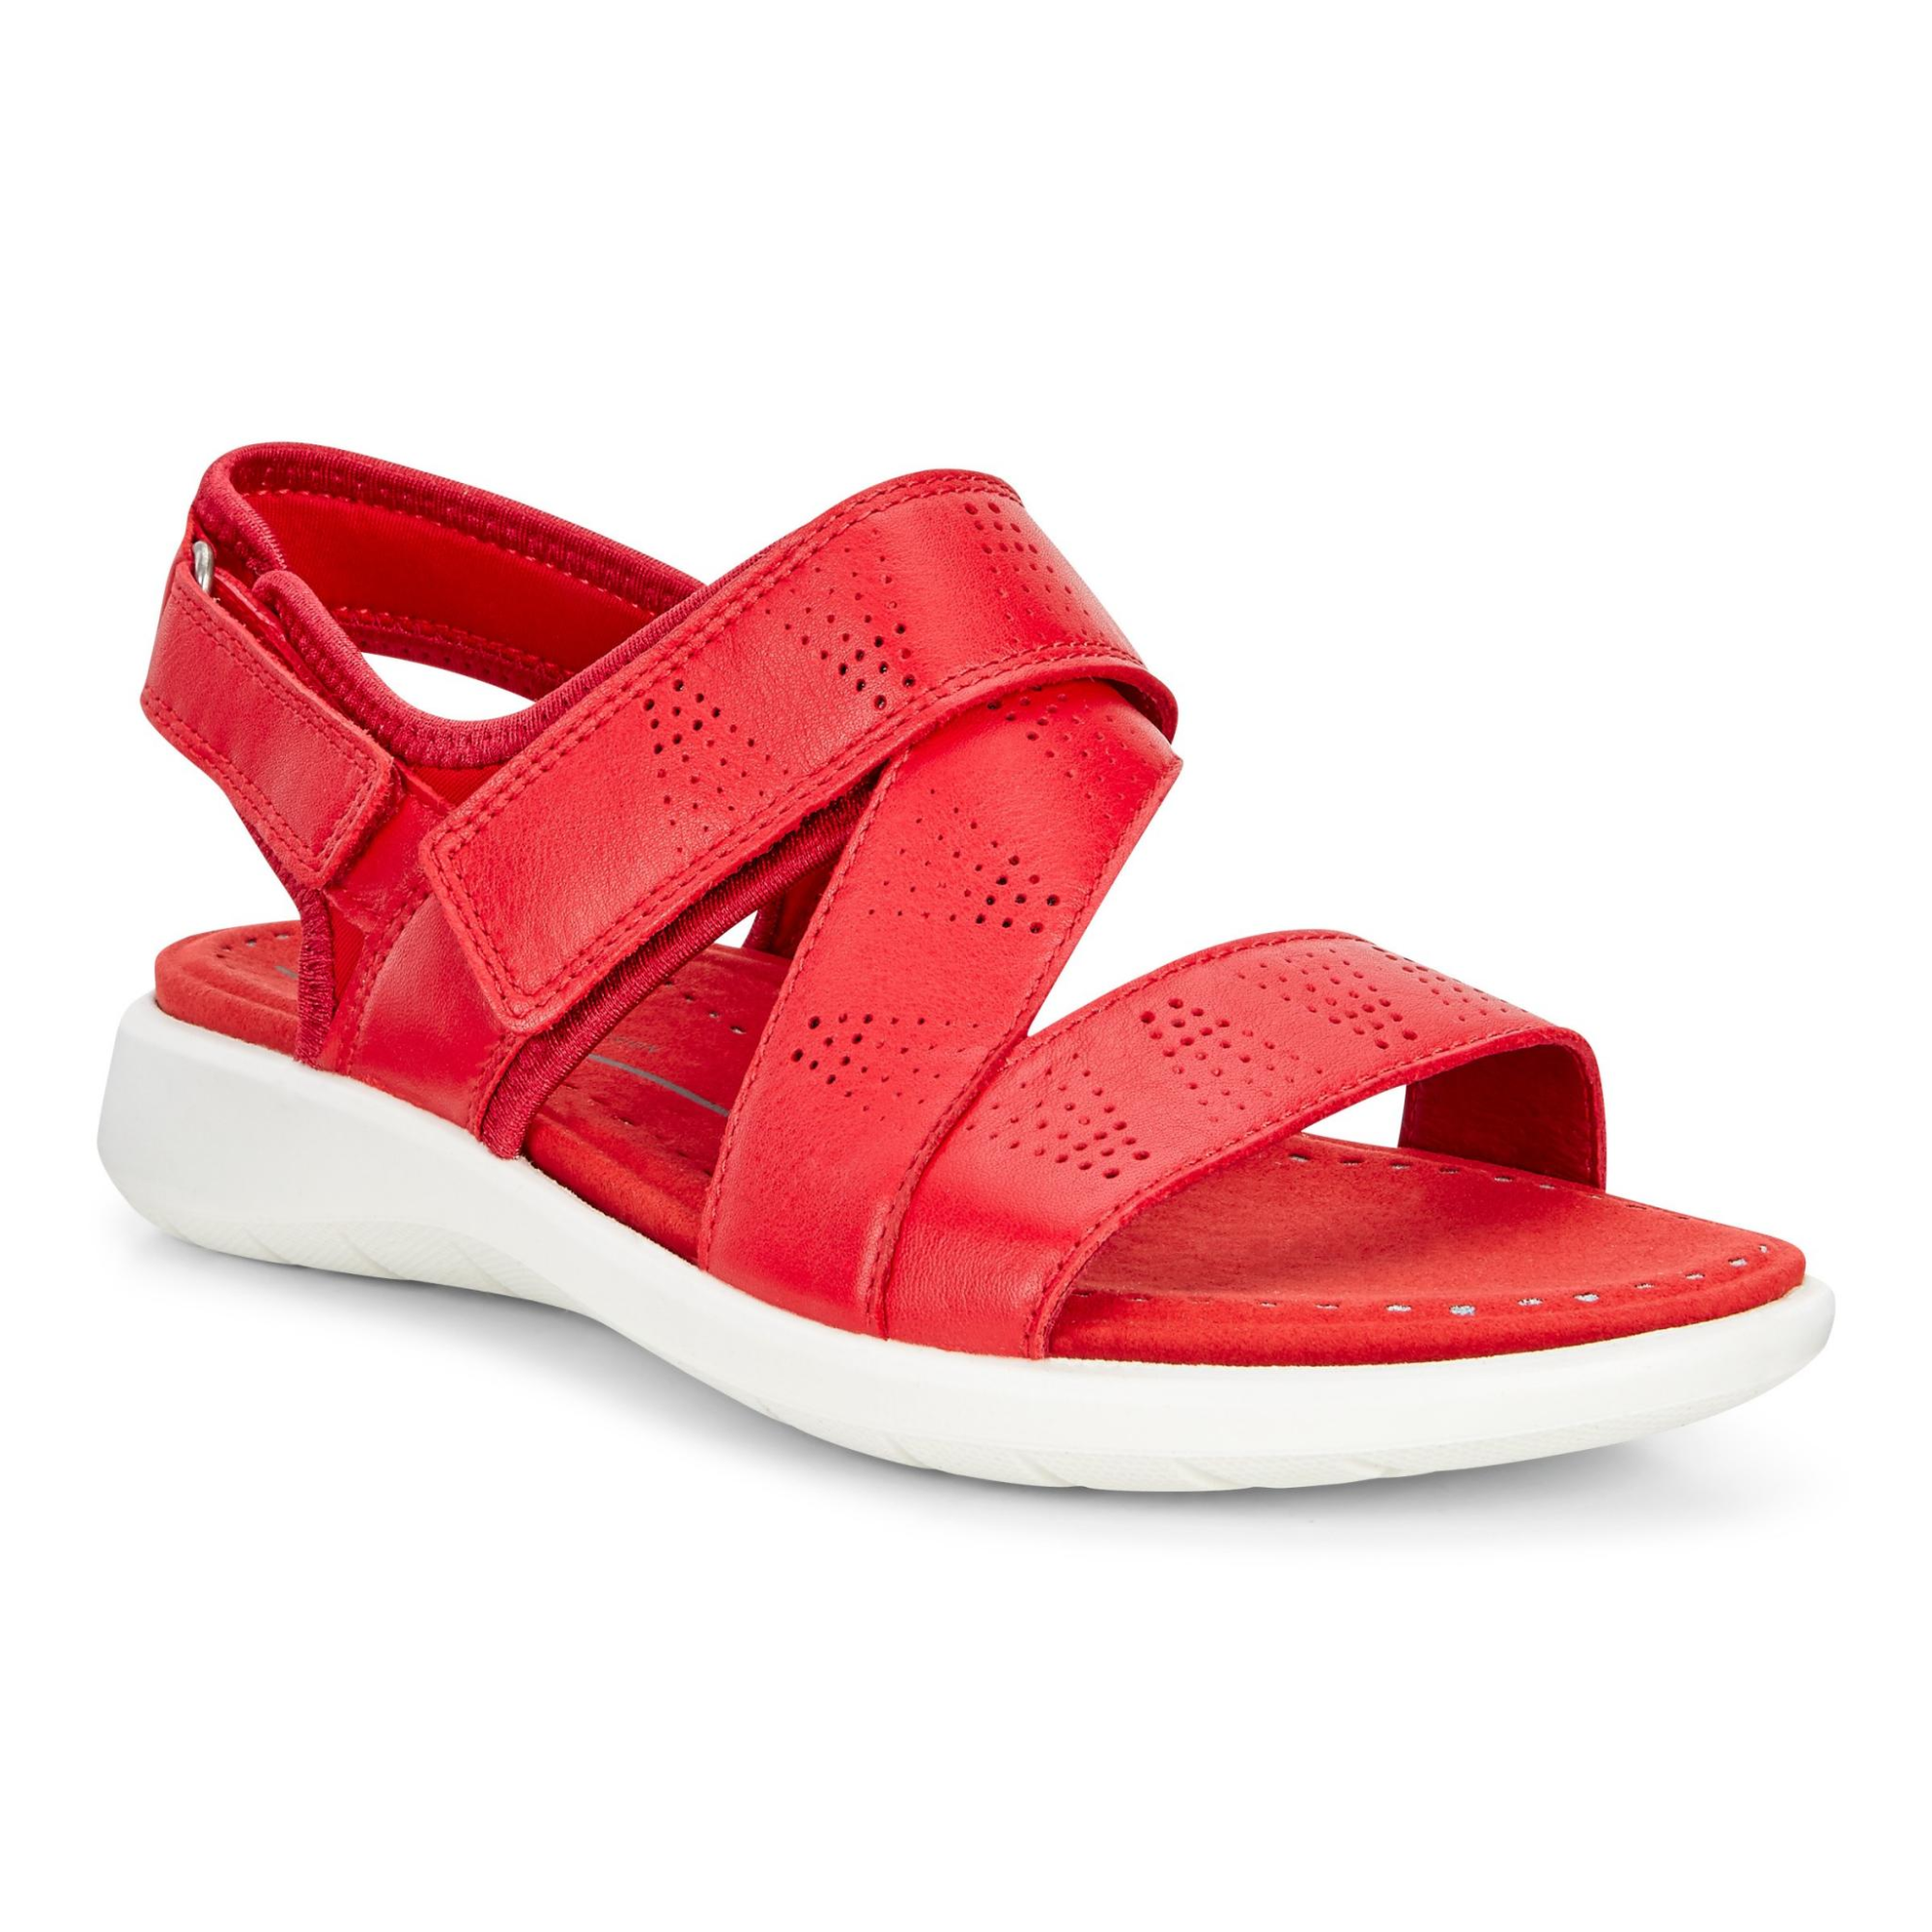 Ecco Soft 5 Cross Strap Sandal 38 - Products - Veryk Mall - Veryk Mall, many product, response, safe your money!